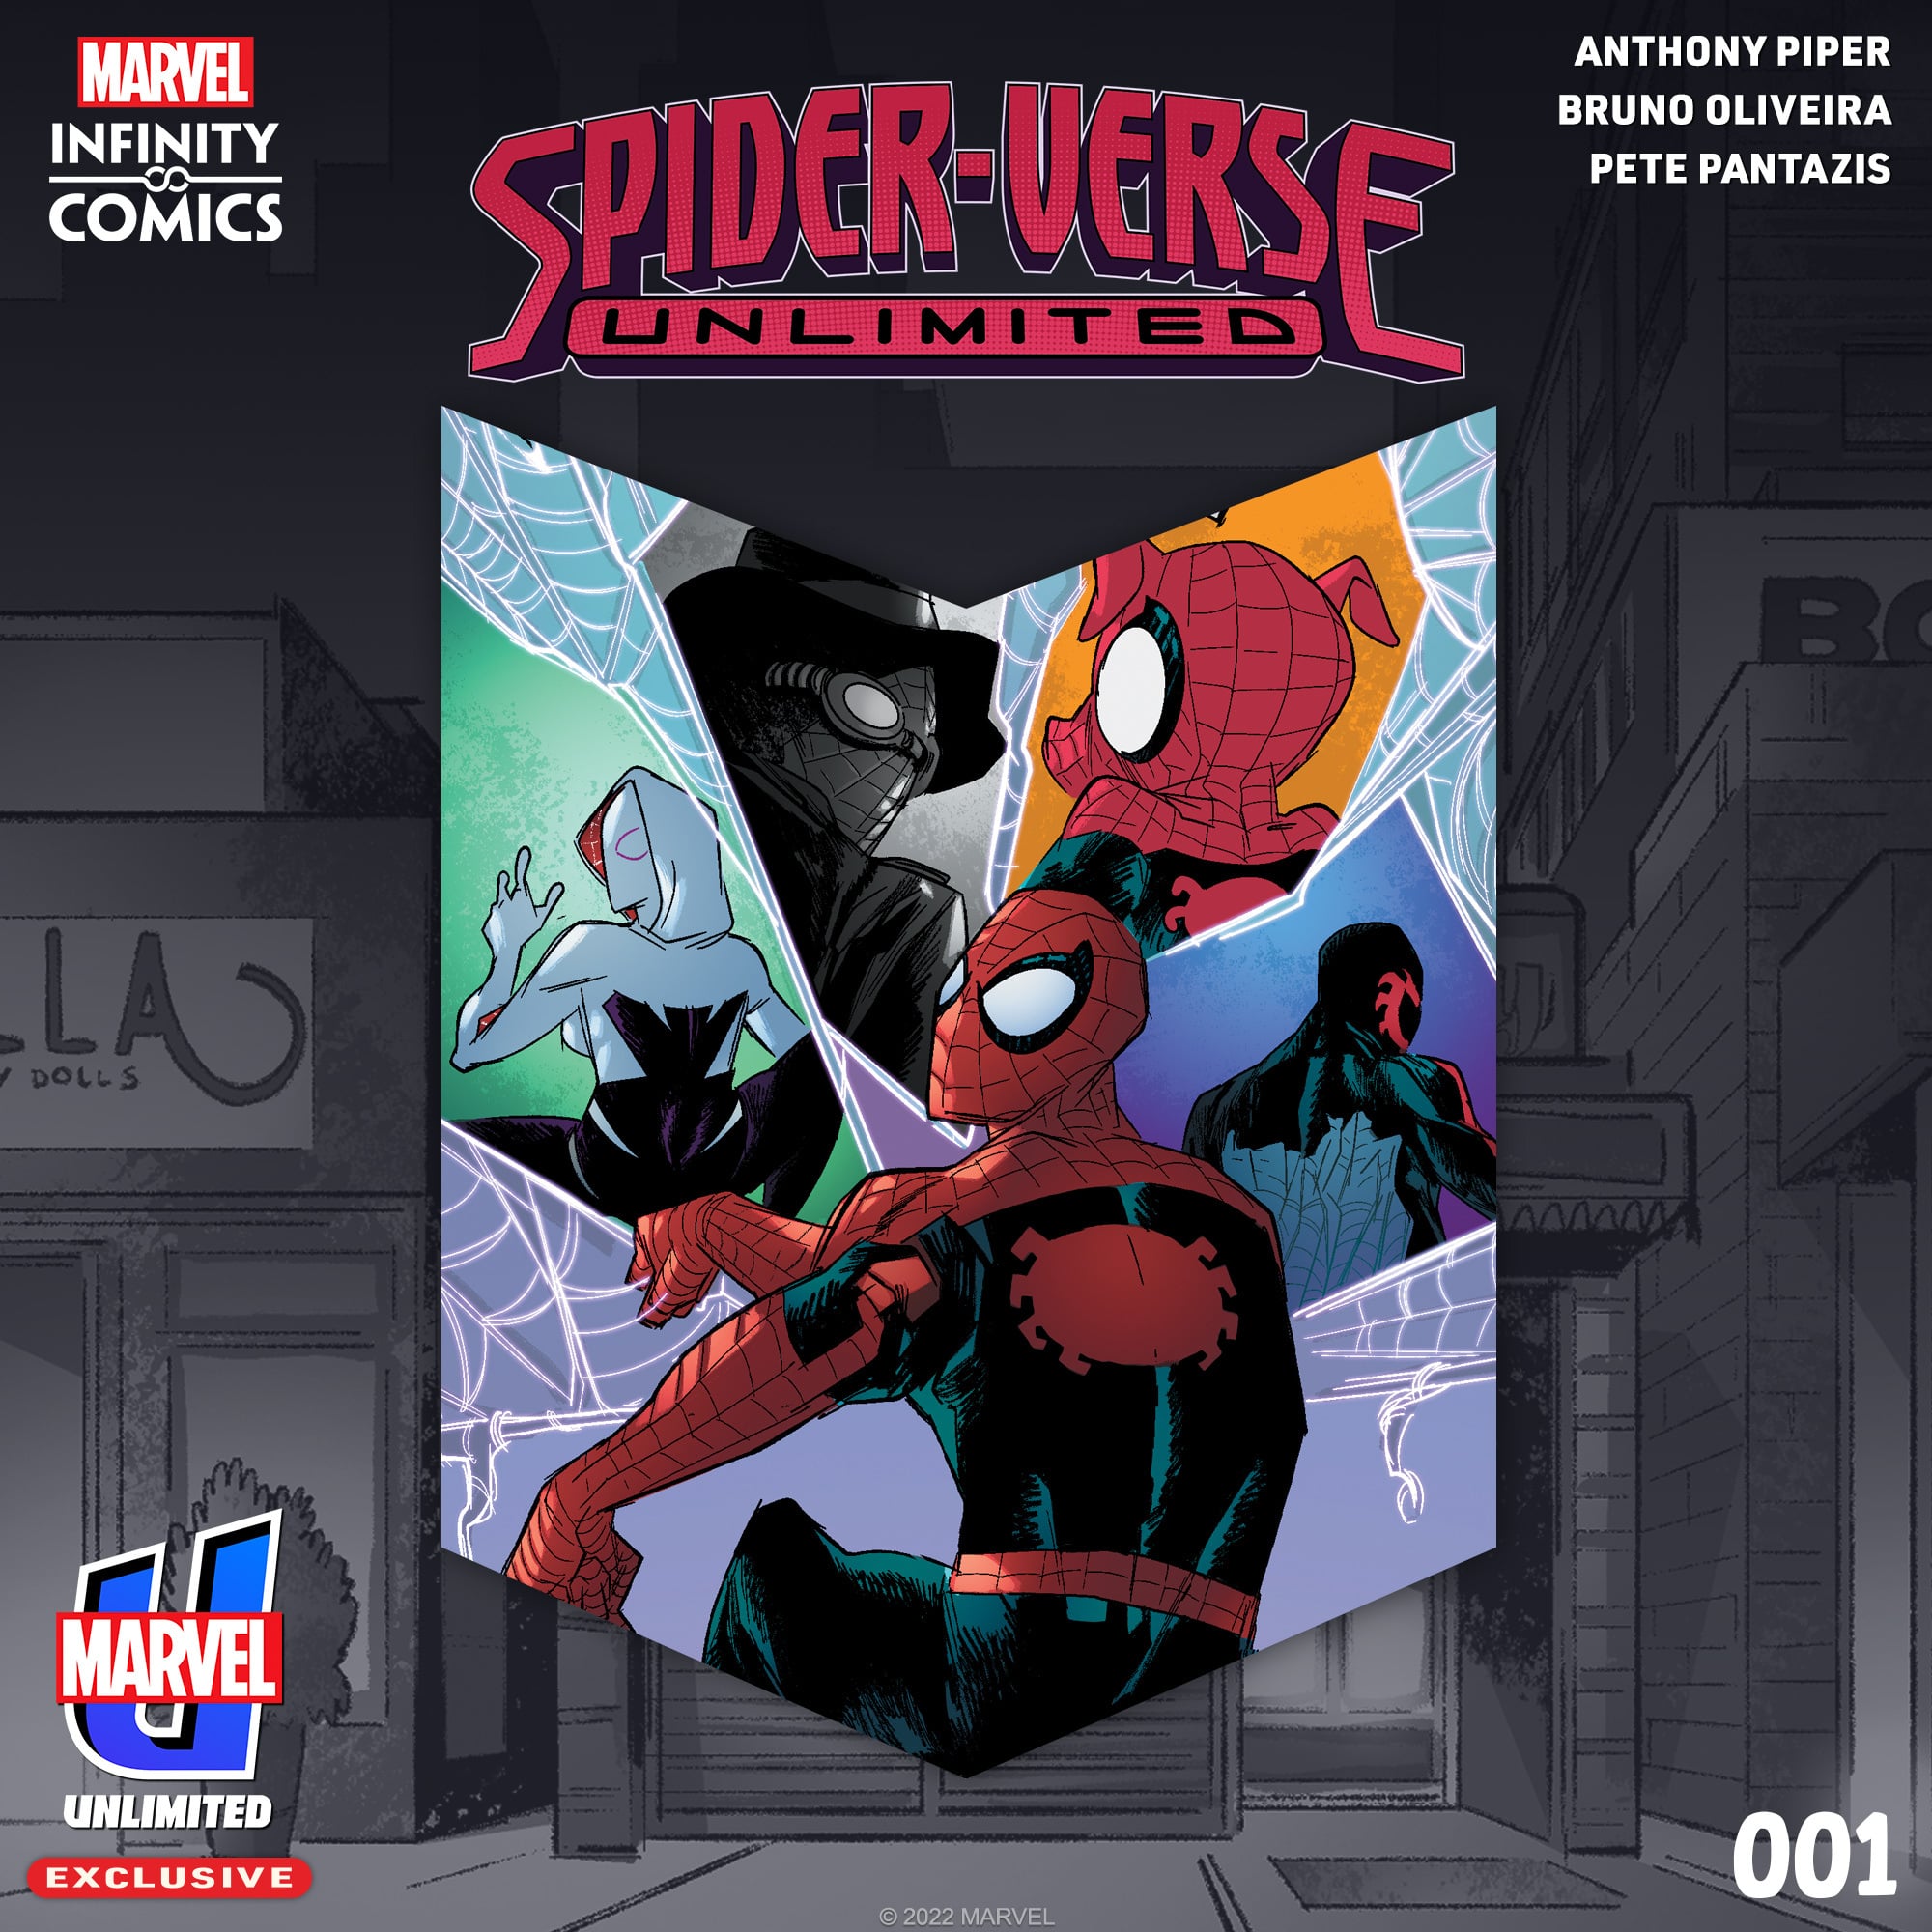 Spider-Verse Unlimited' series launches on Marvel Unlimited today • AIPT